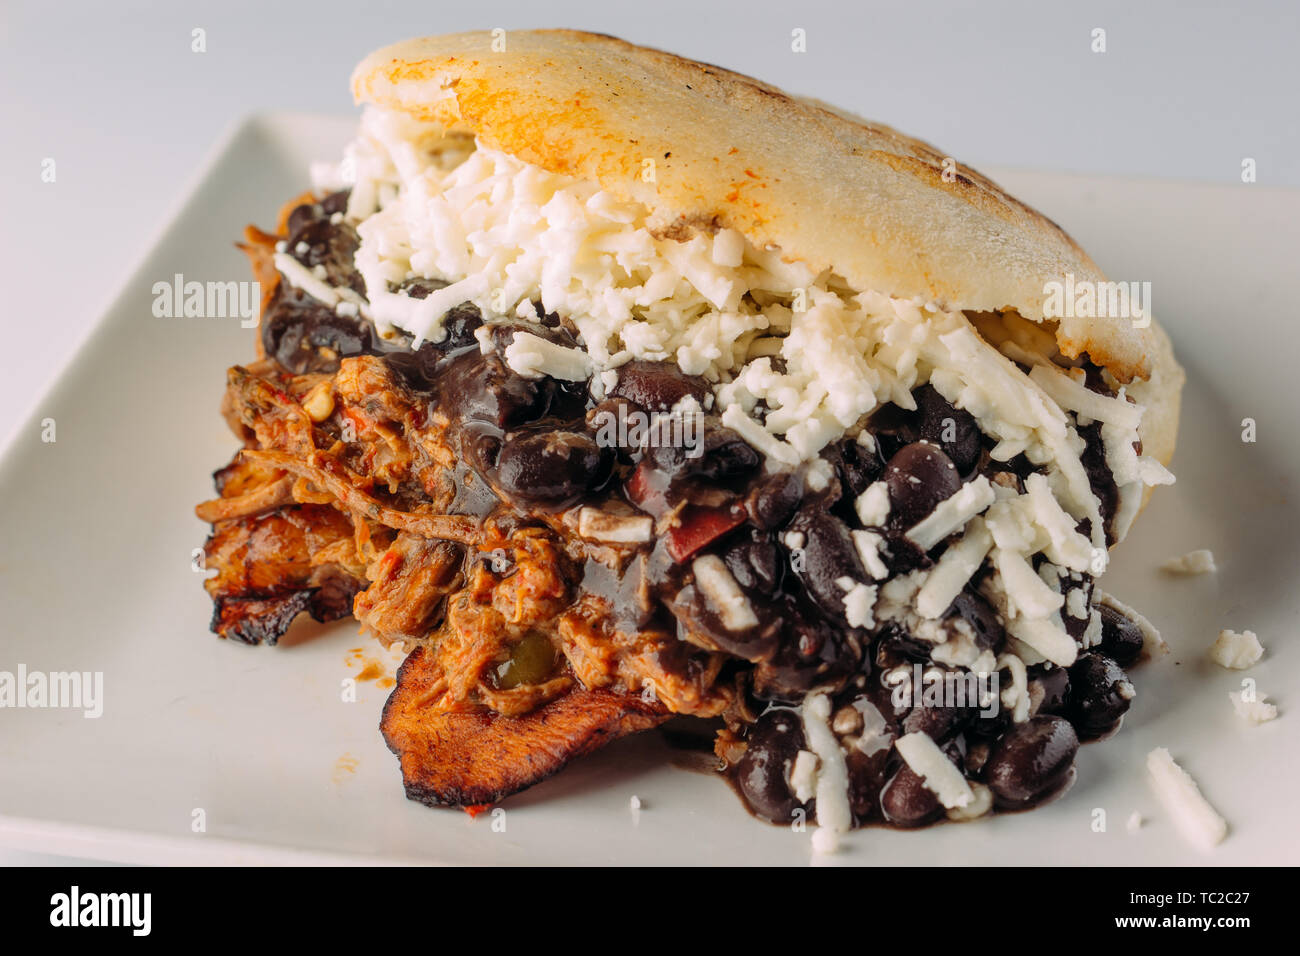 Arepa typical of Venezuela, Pabellon criollo, stuffed with fried plantain, white cheese, mechada meat and black beans Stock Photo